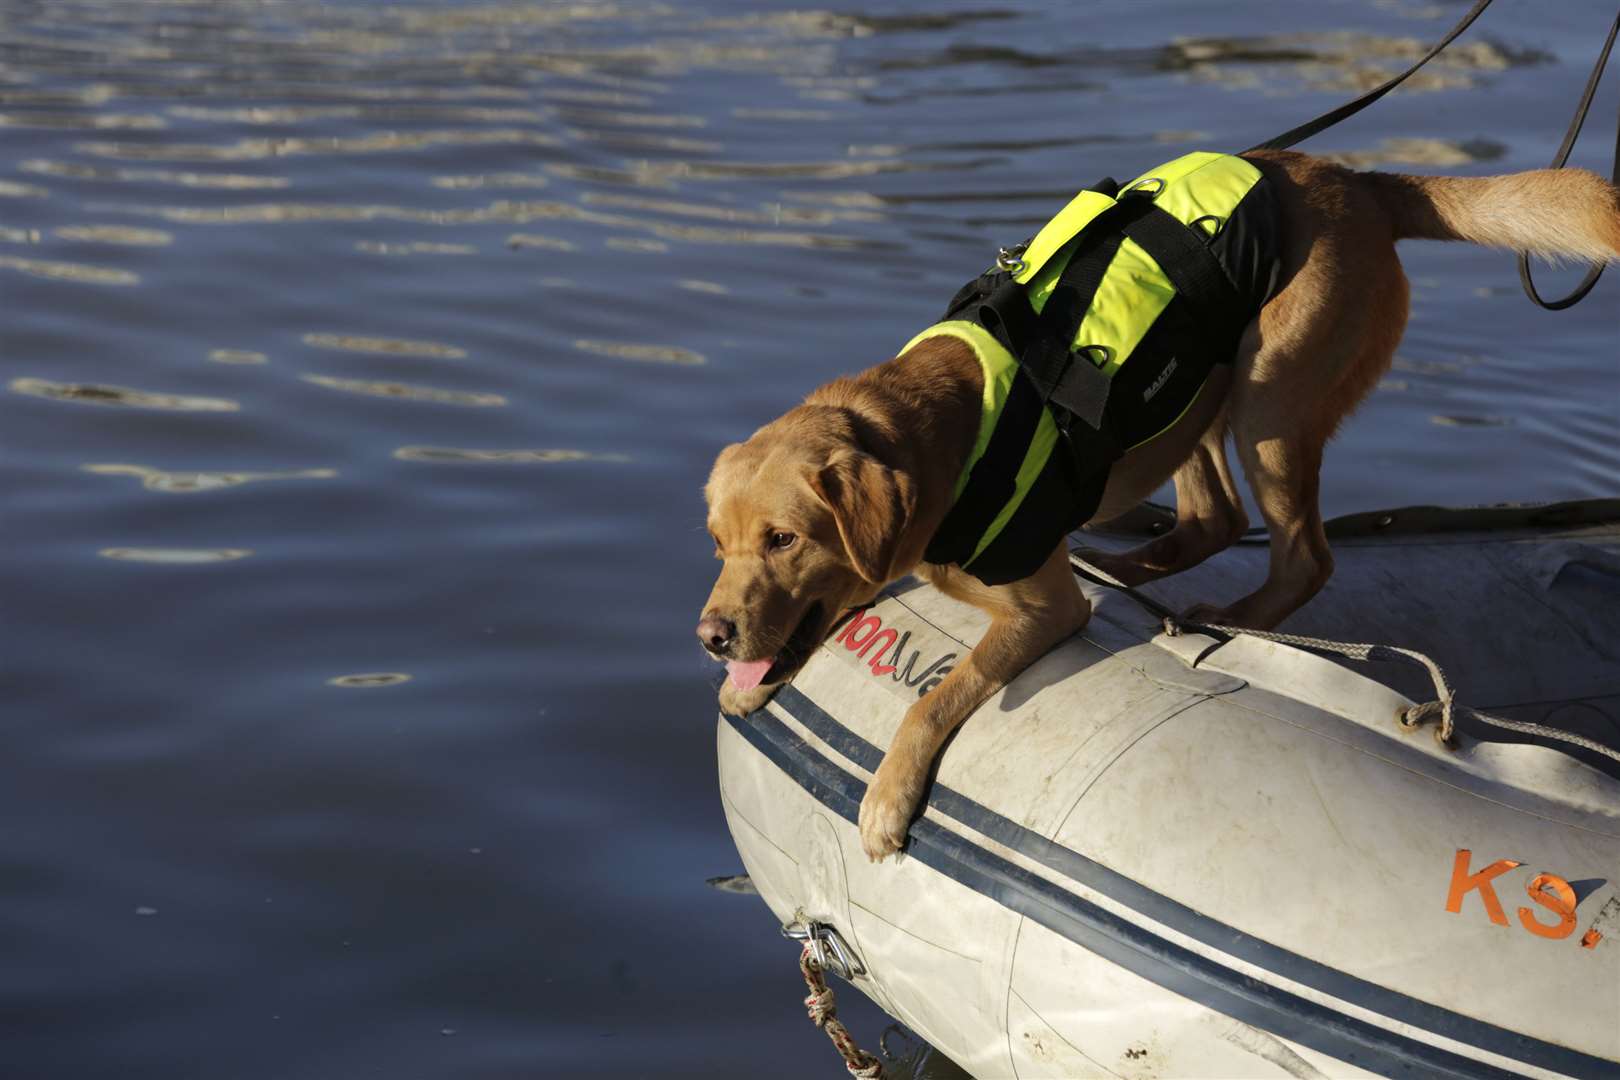 A search dog is being used on a boat on the river